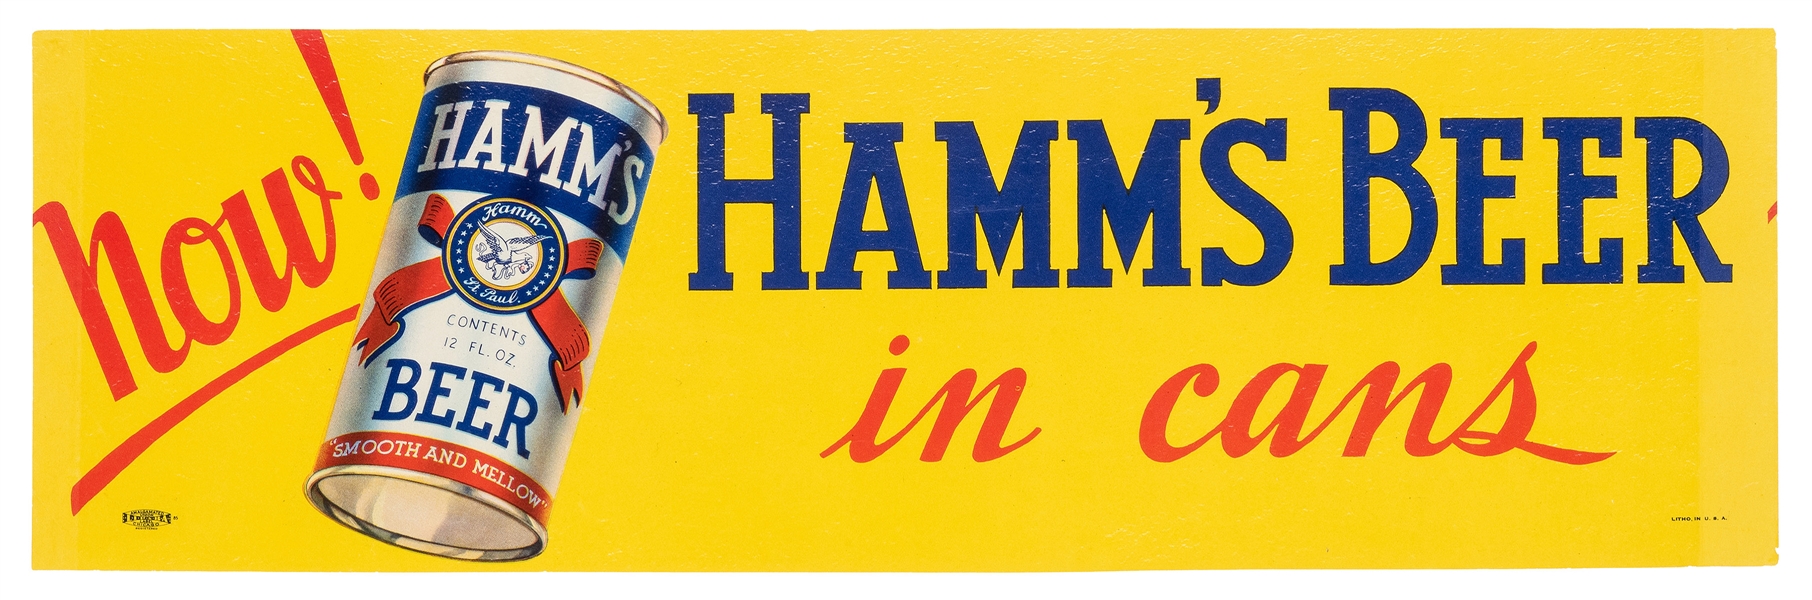 Hamm’s Beer. Now In Cans!.